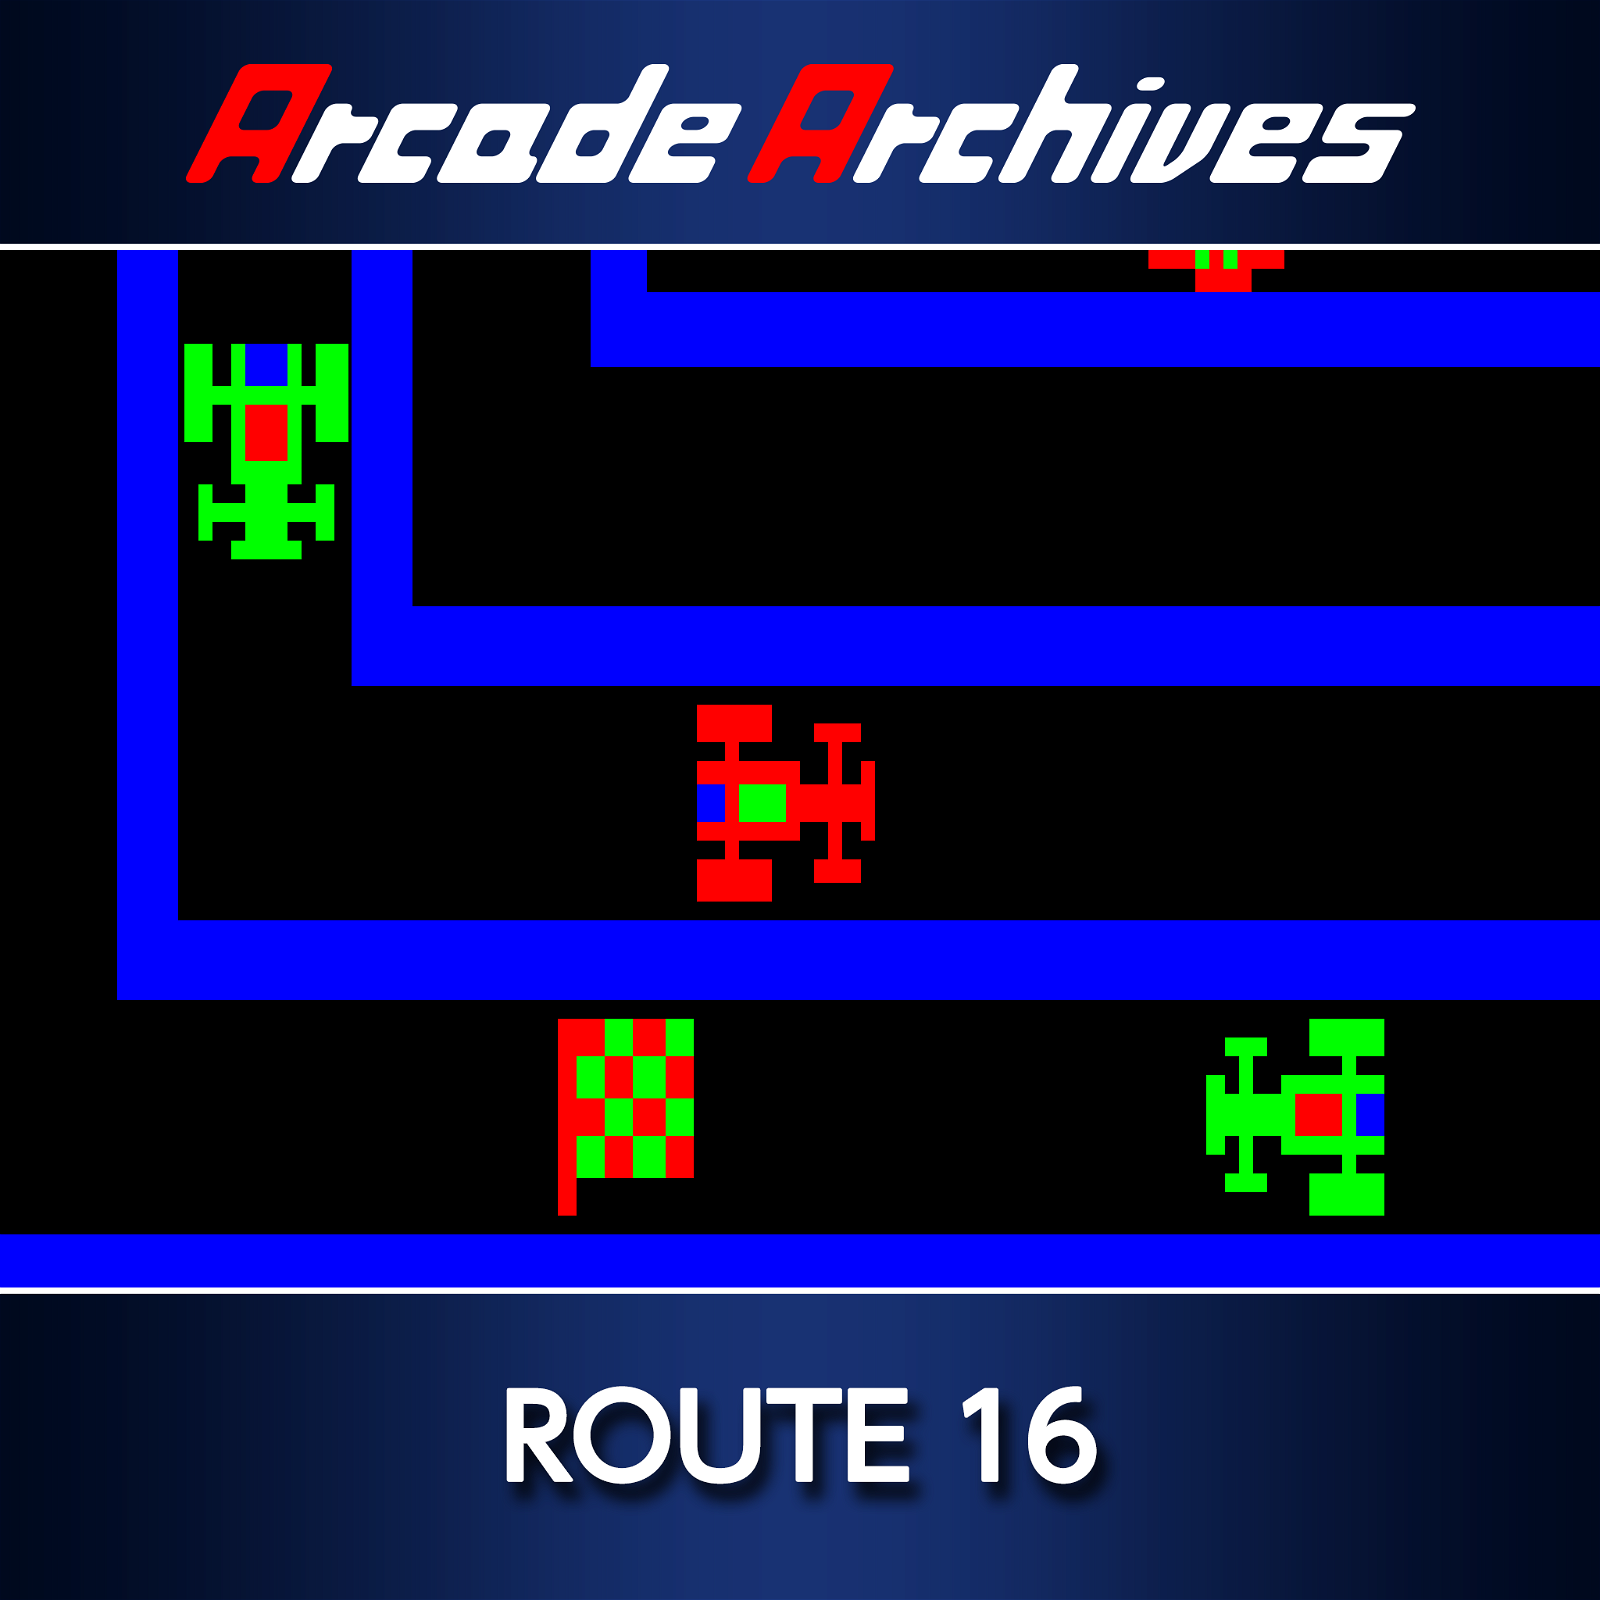 Image of Arcade Archives ROUTE 16